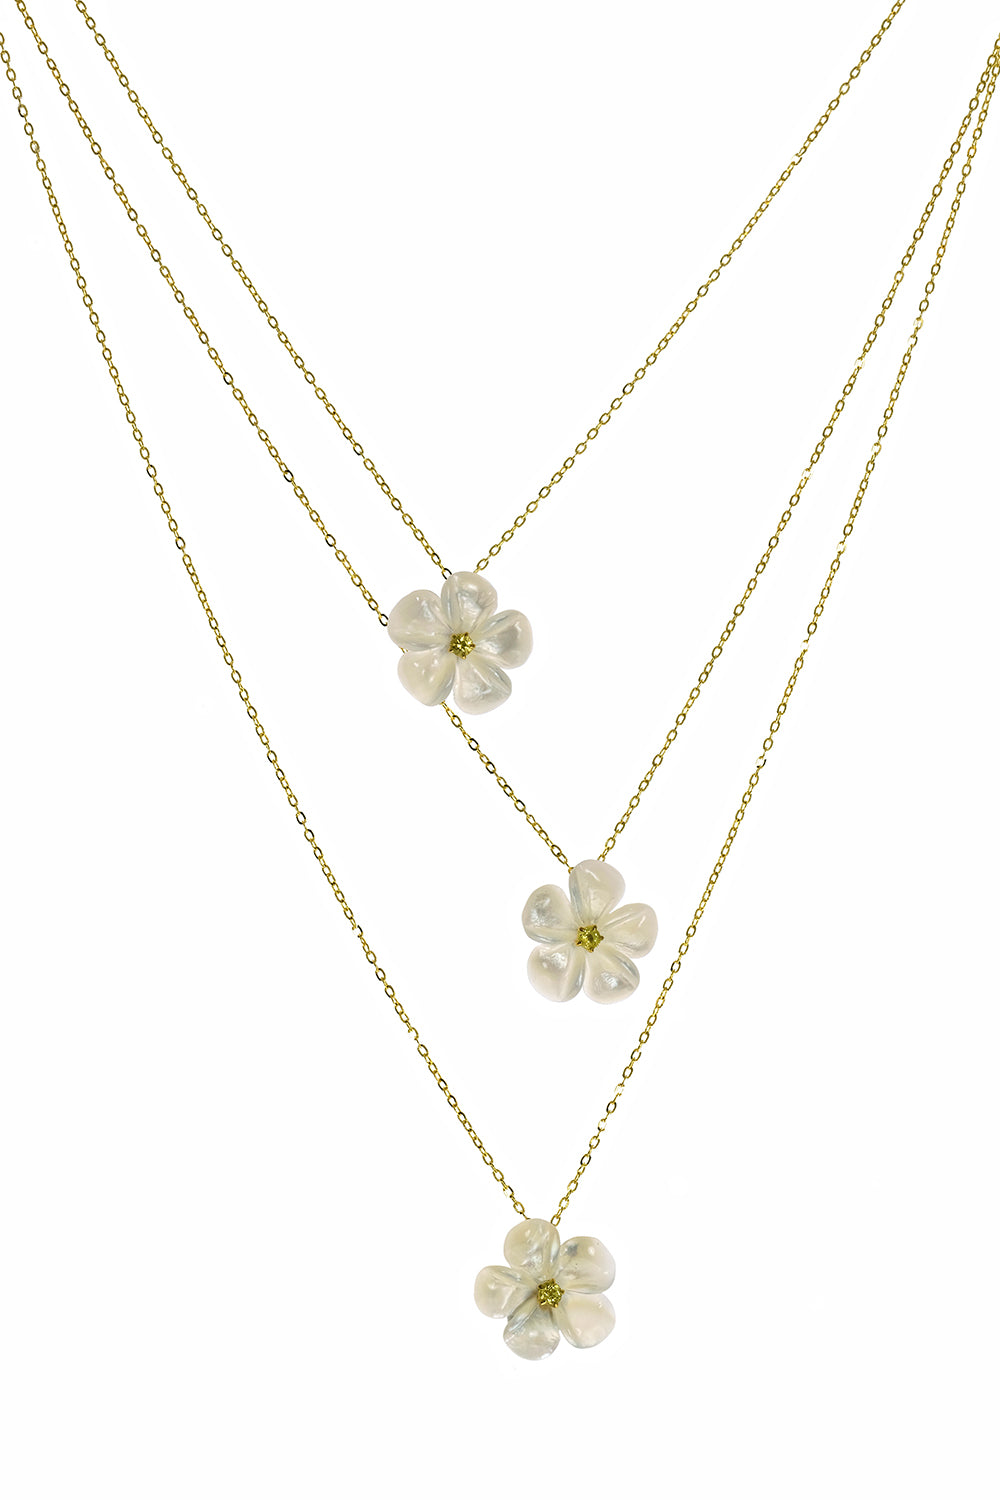 Mother of Pearl Kalachuchi Necklace, Small, with Yellow Sapphire and Chain (available in yellow, white, and rose gold)